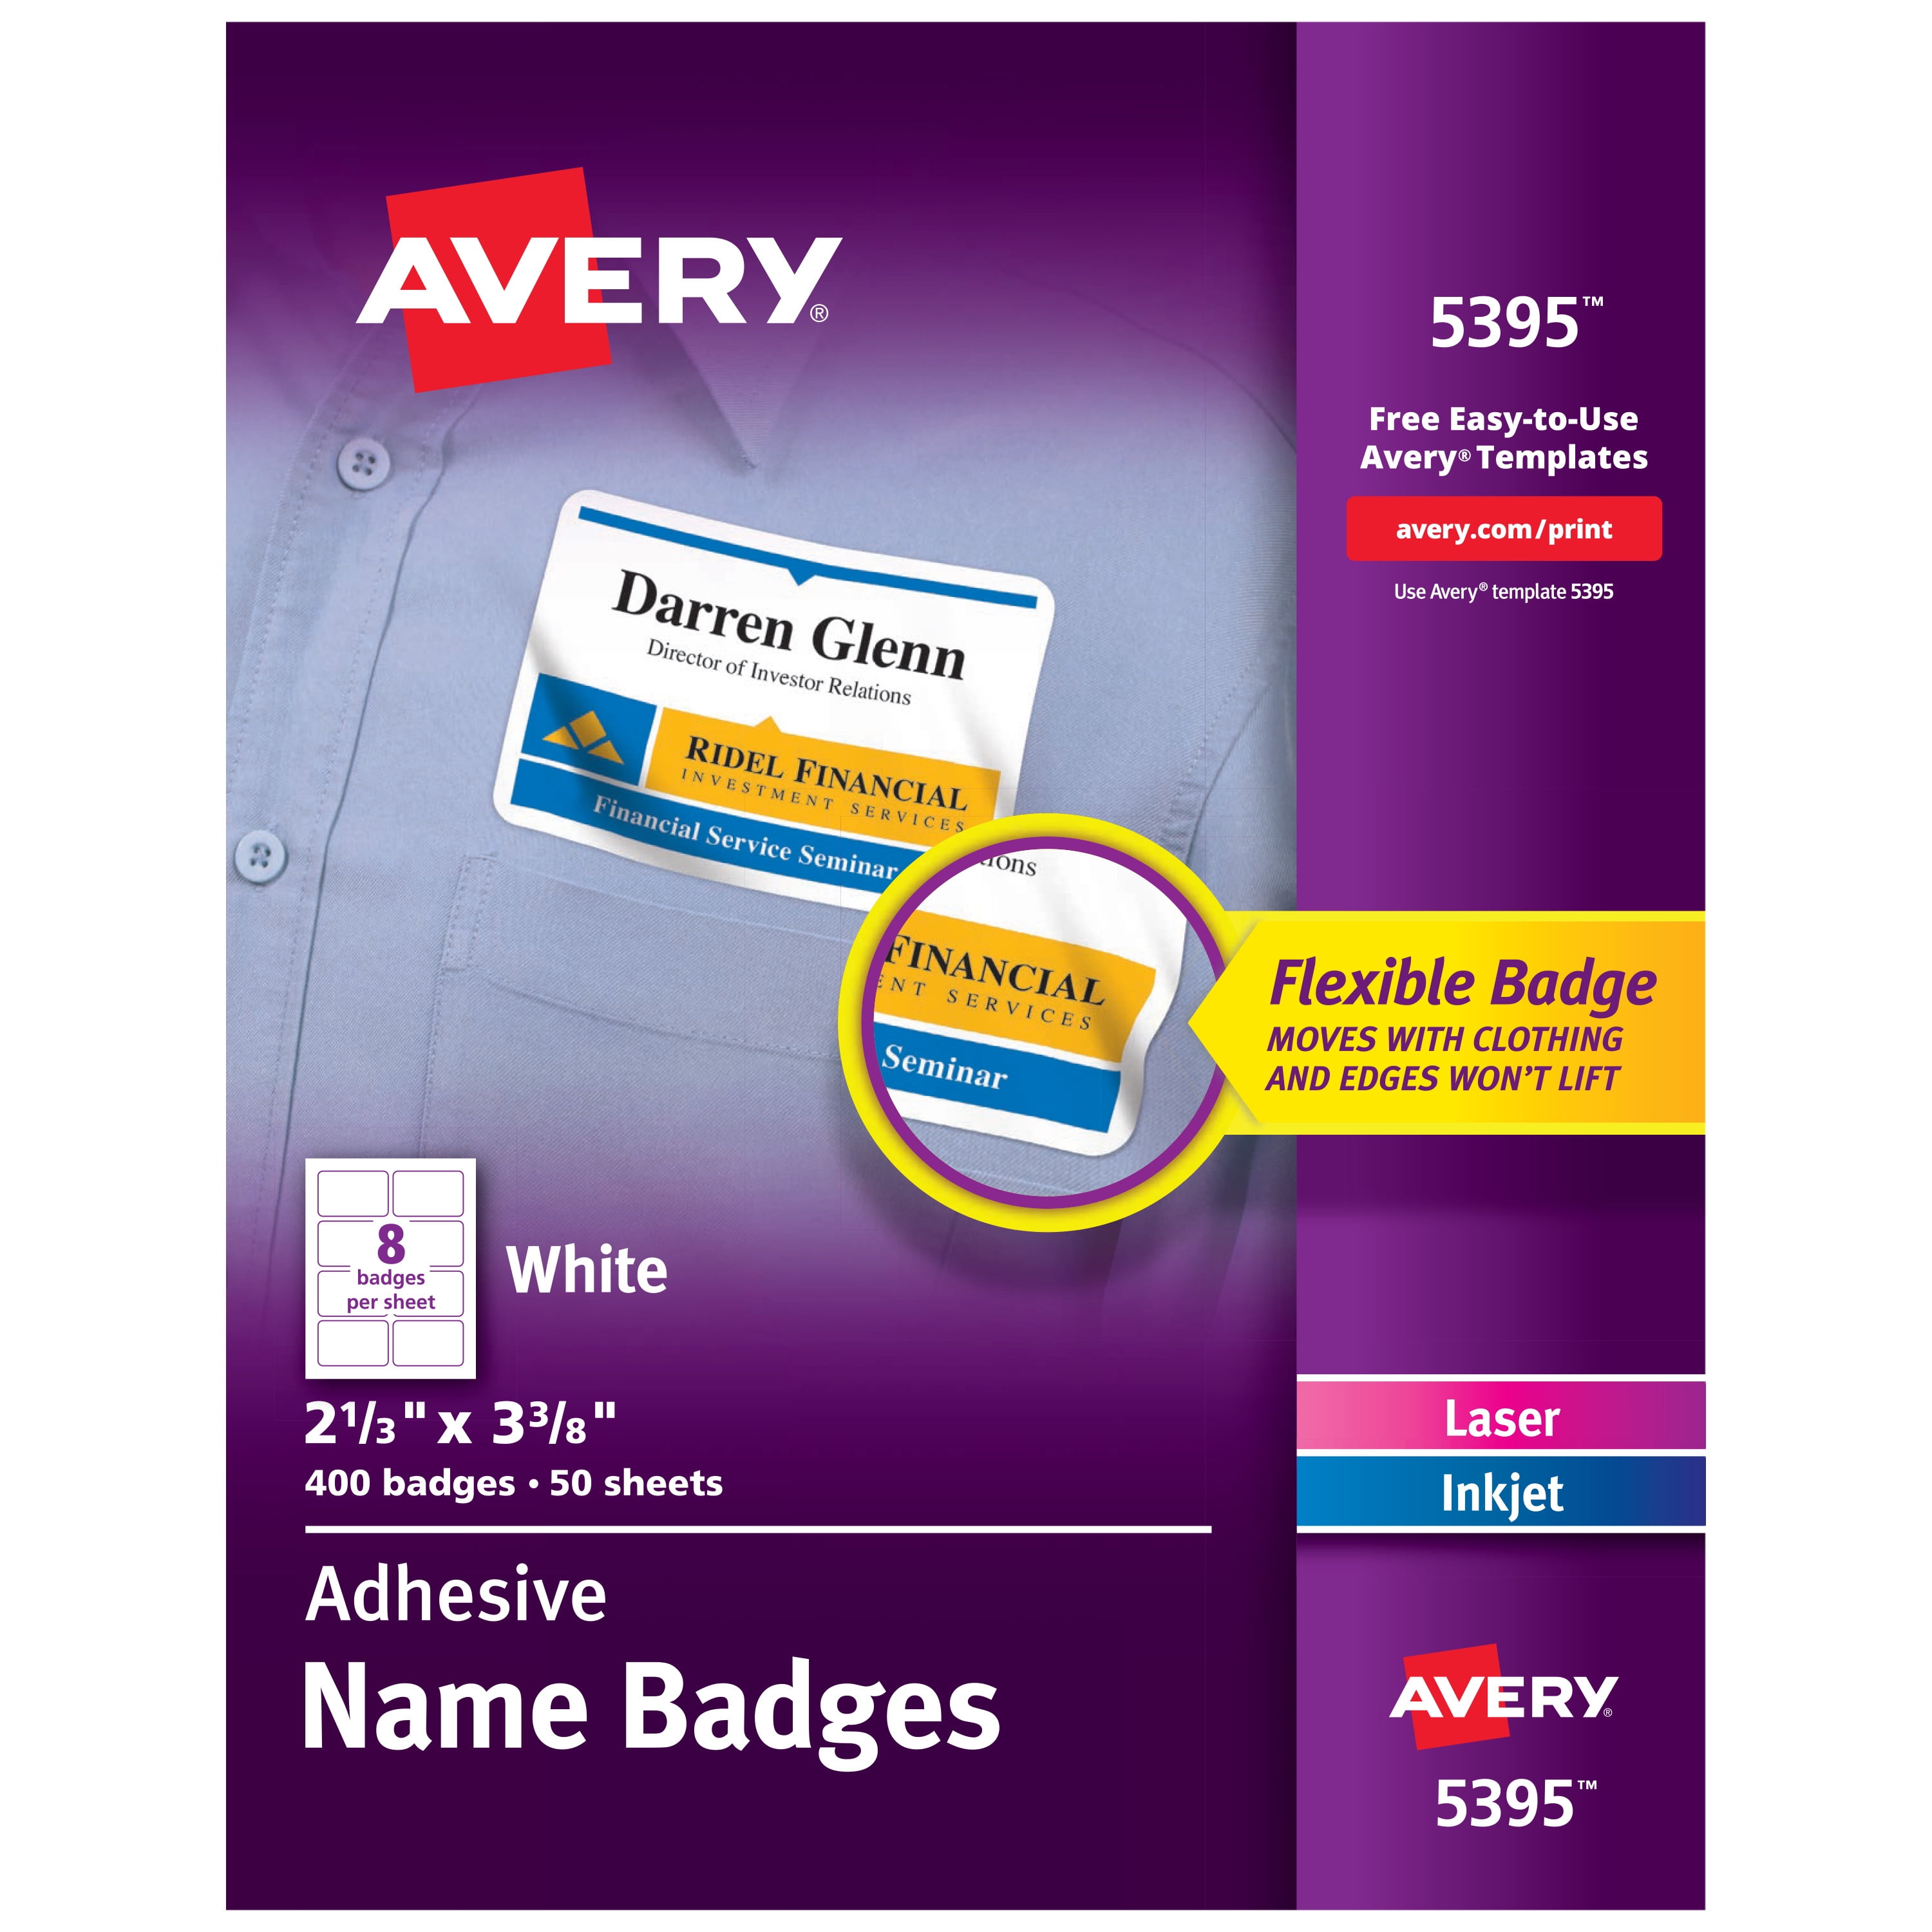 Assorted Colors Avery Flexible Name Badge Labels 5154 1 x 3-3/4 Pack of 100 